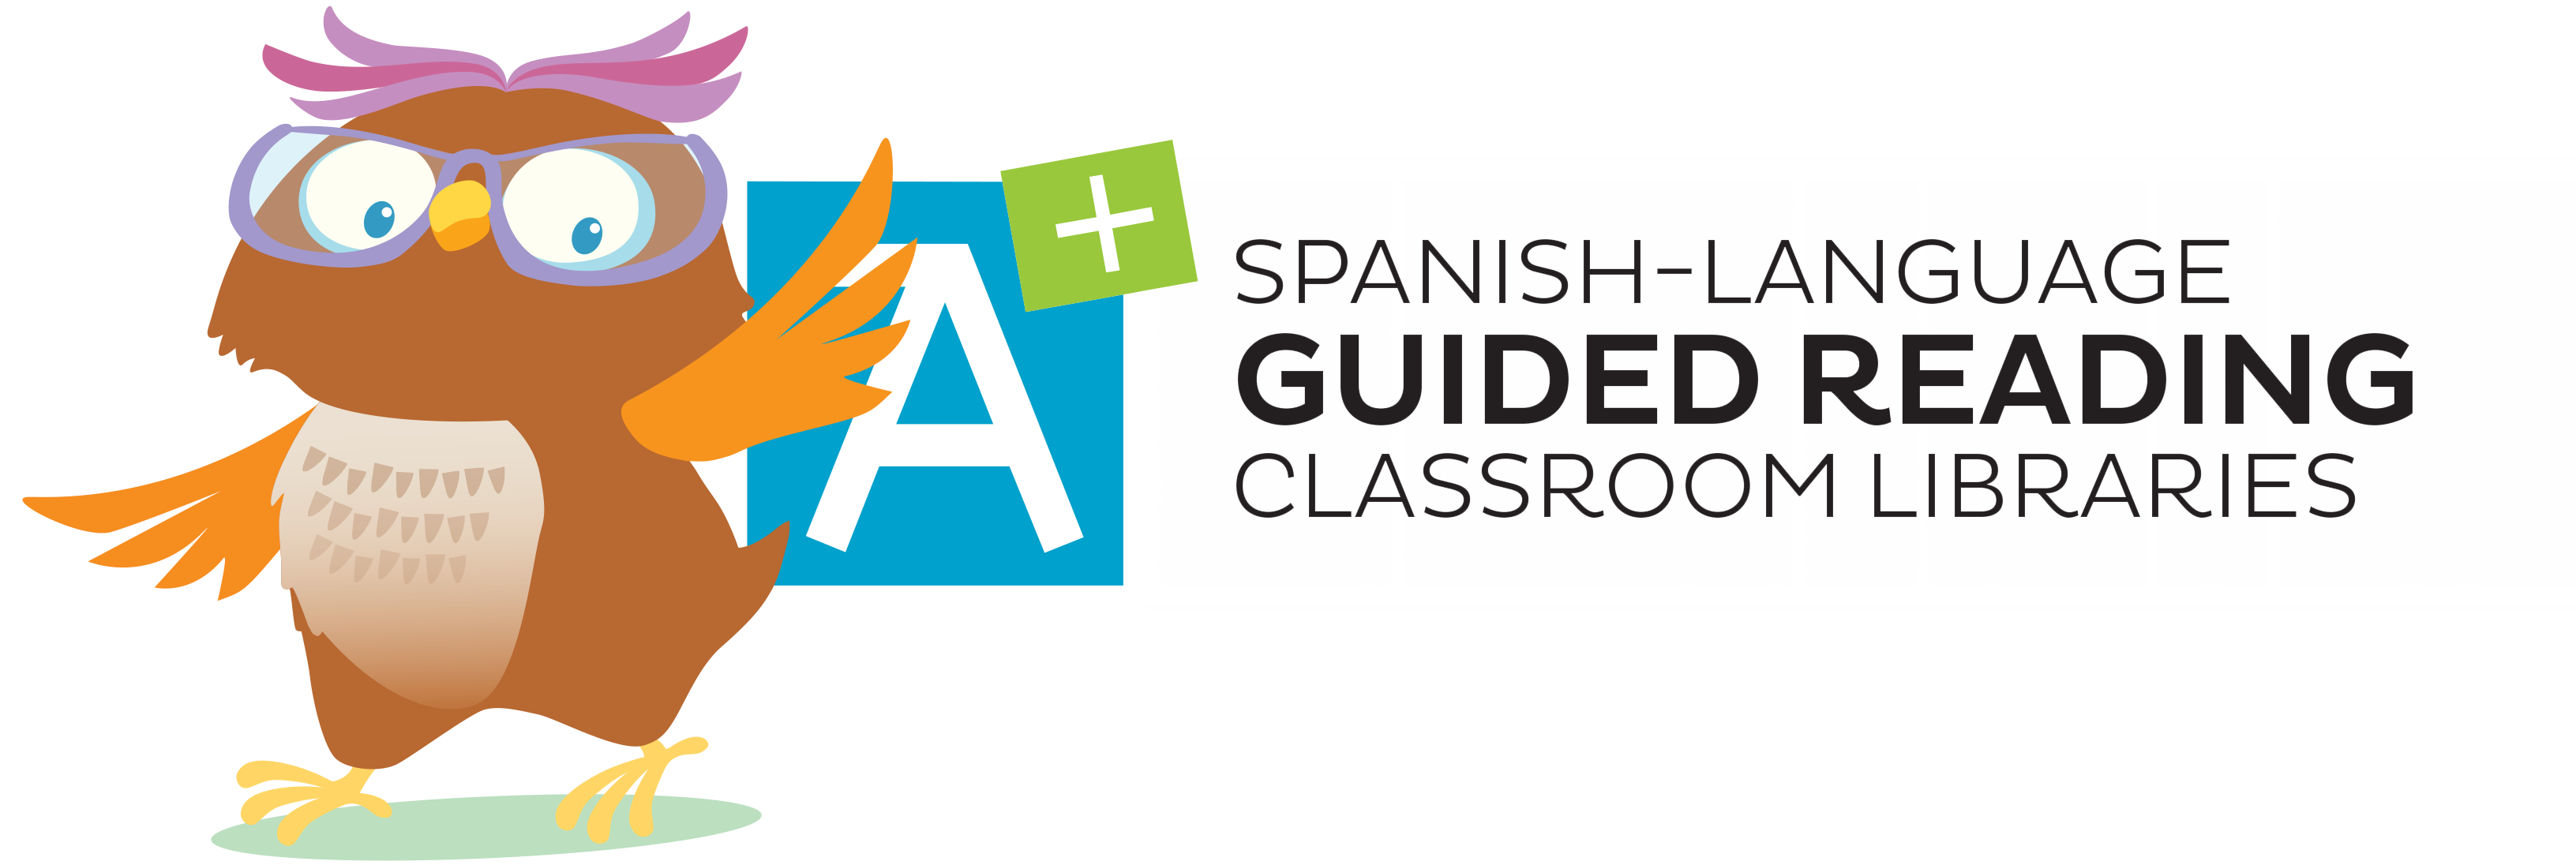 Spanish Guided Reading Libraries